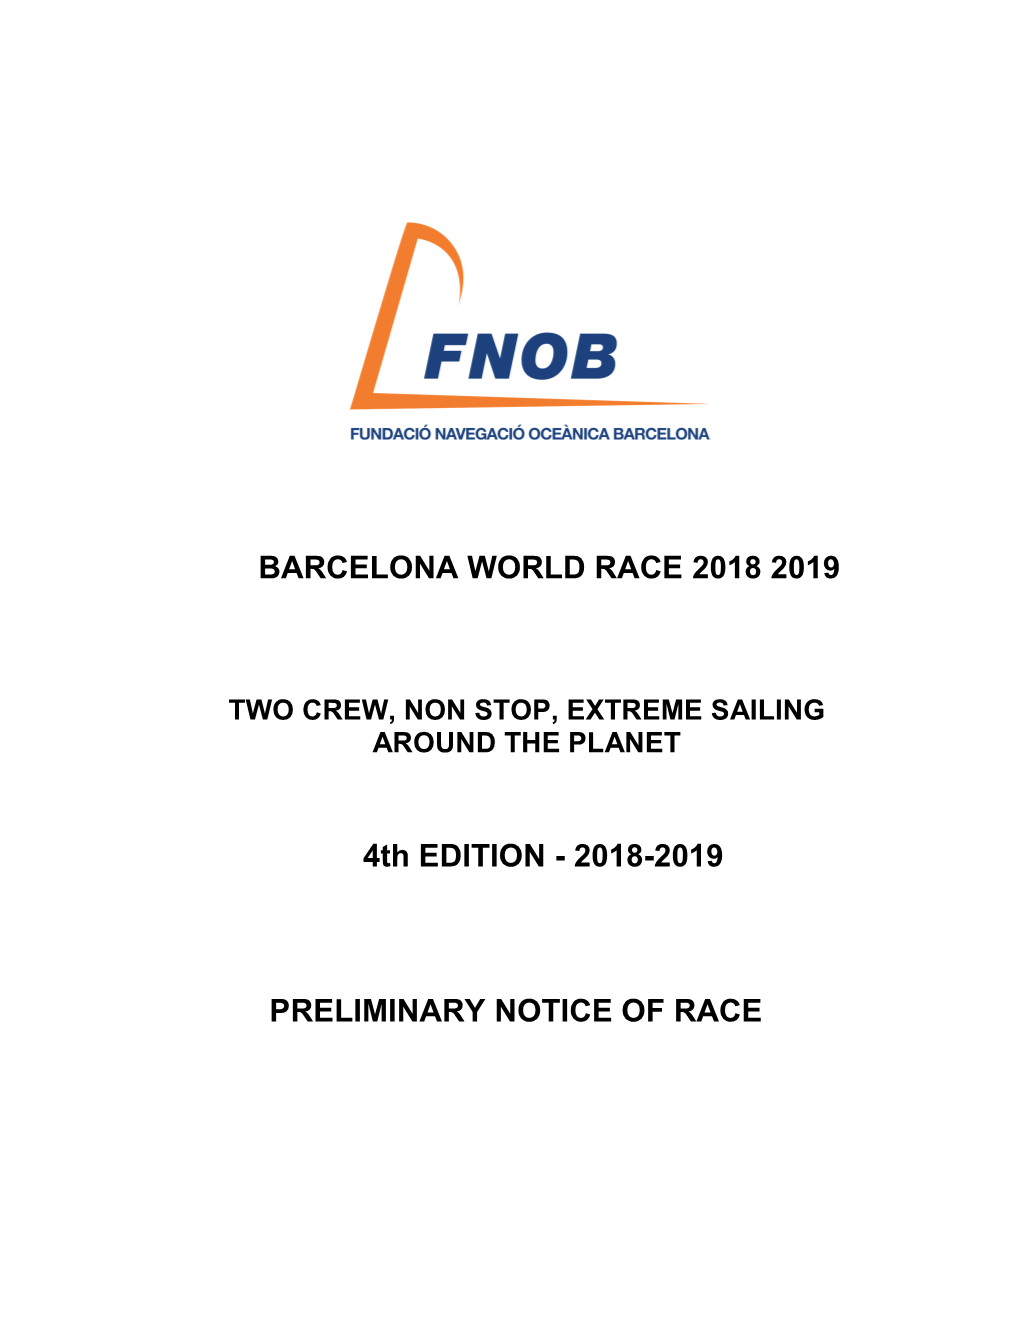 Pre Notice of Race Bwr 2018 Vdef